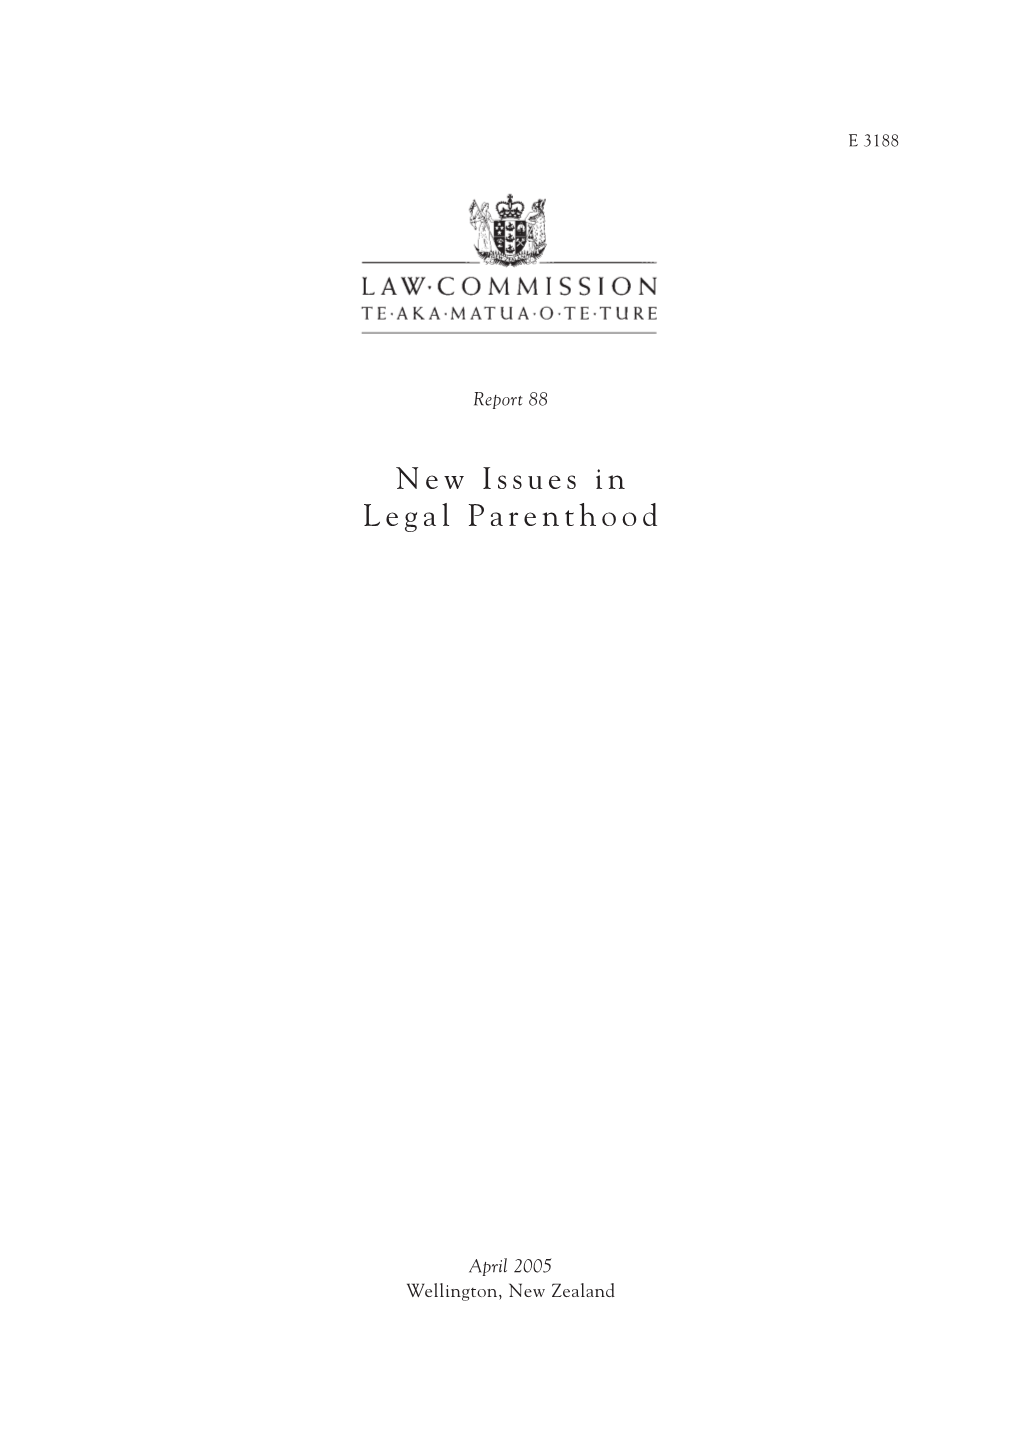 New Issues in Legal Parenthood / Law Commission